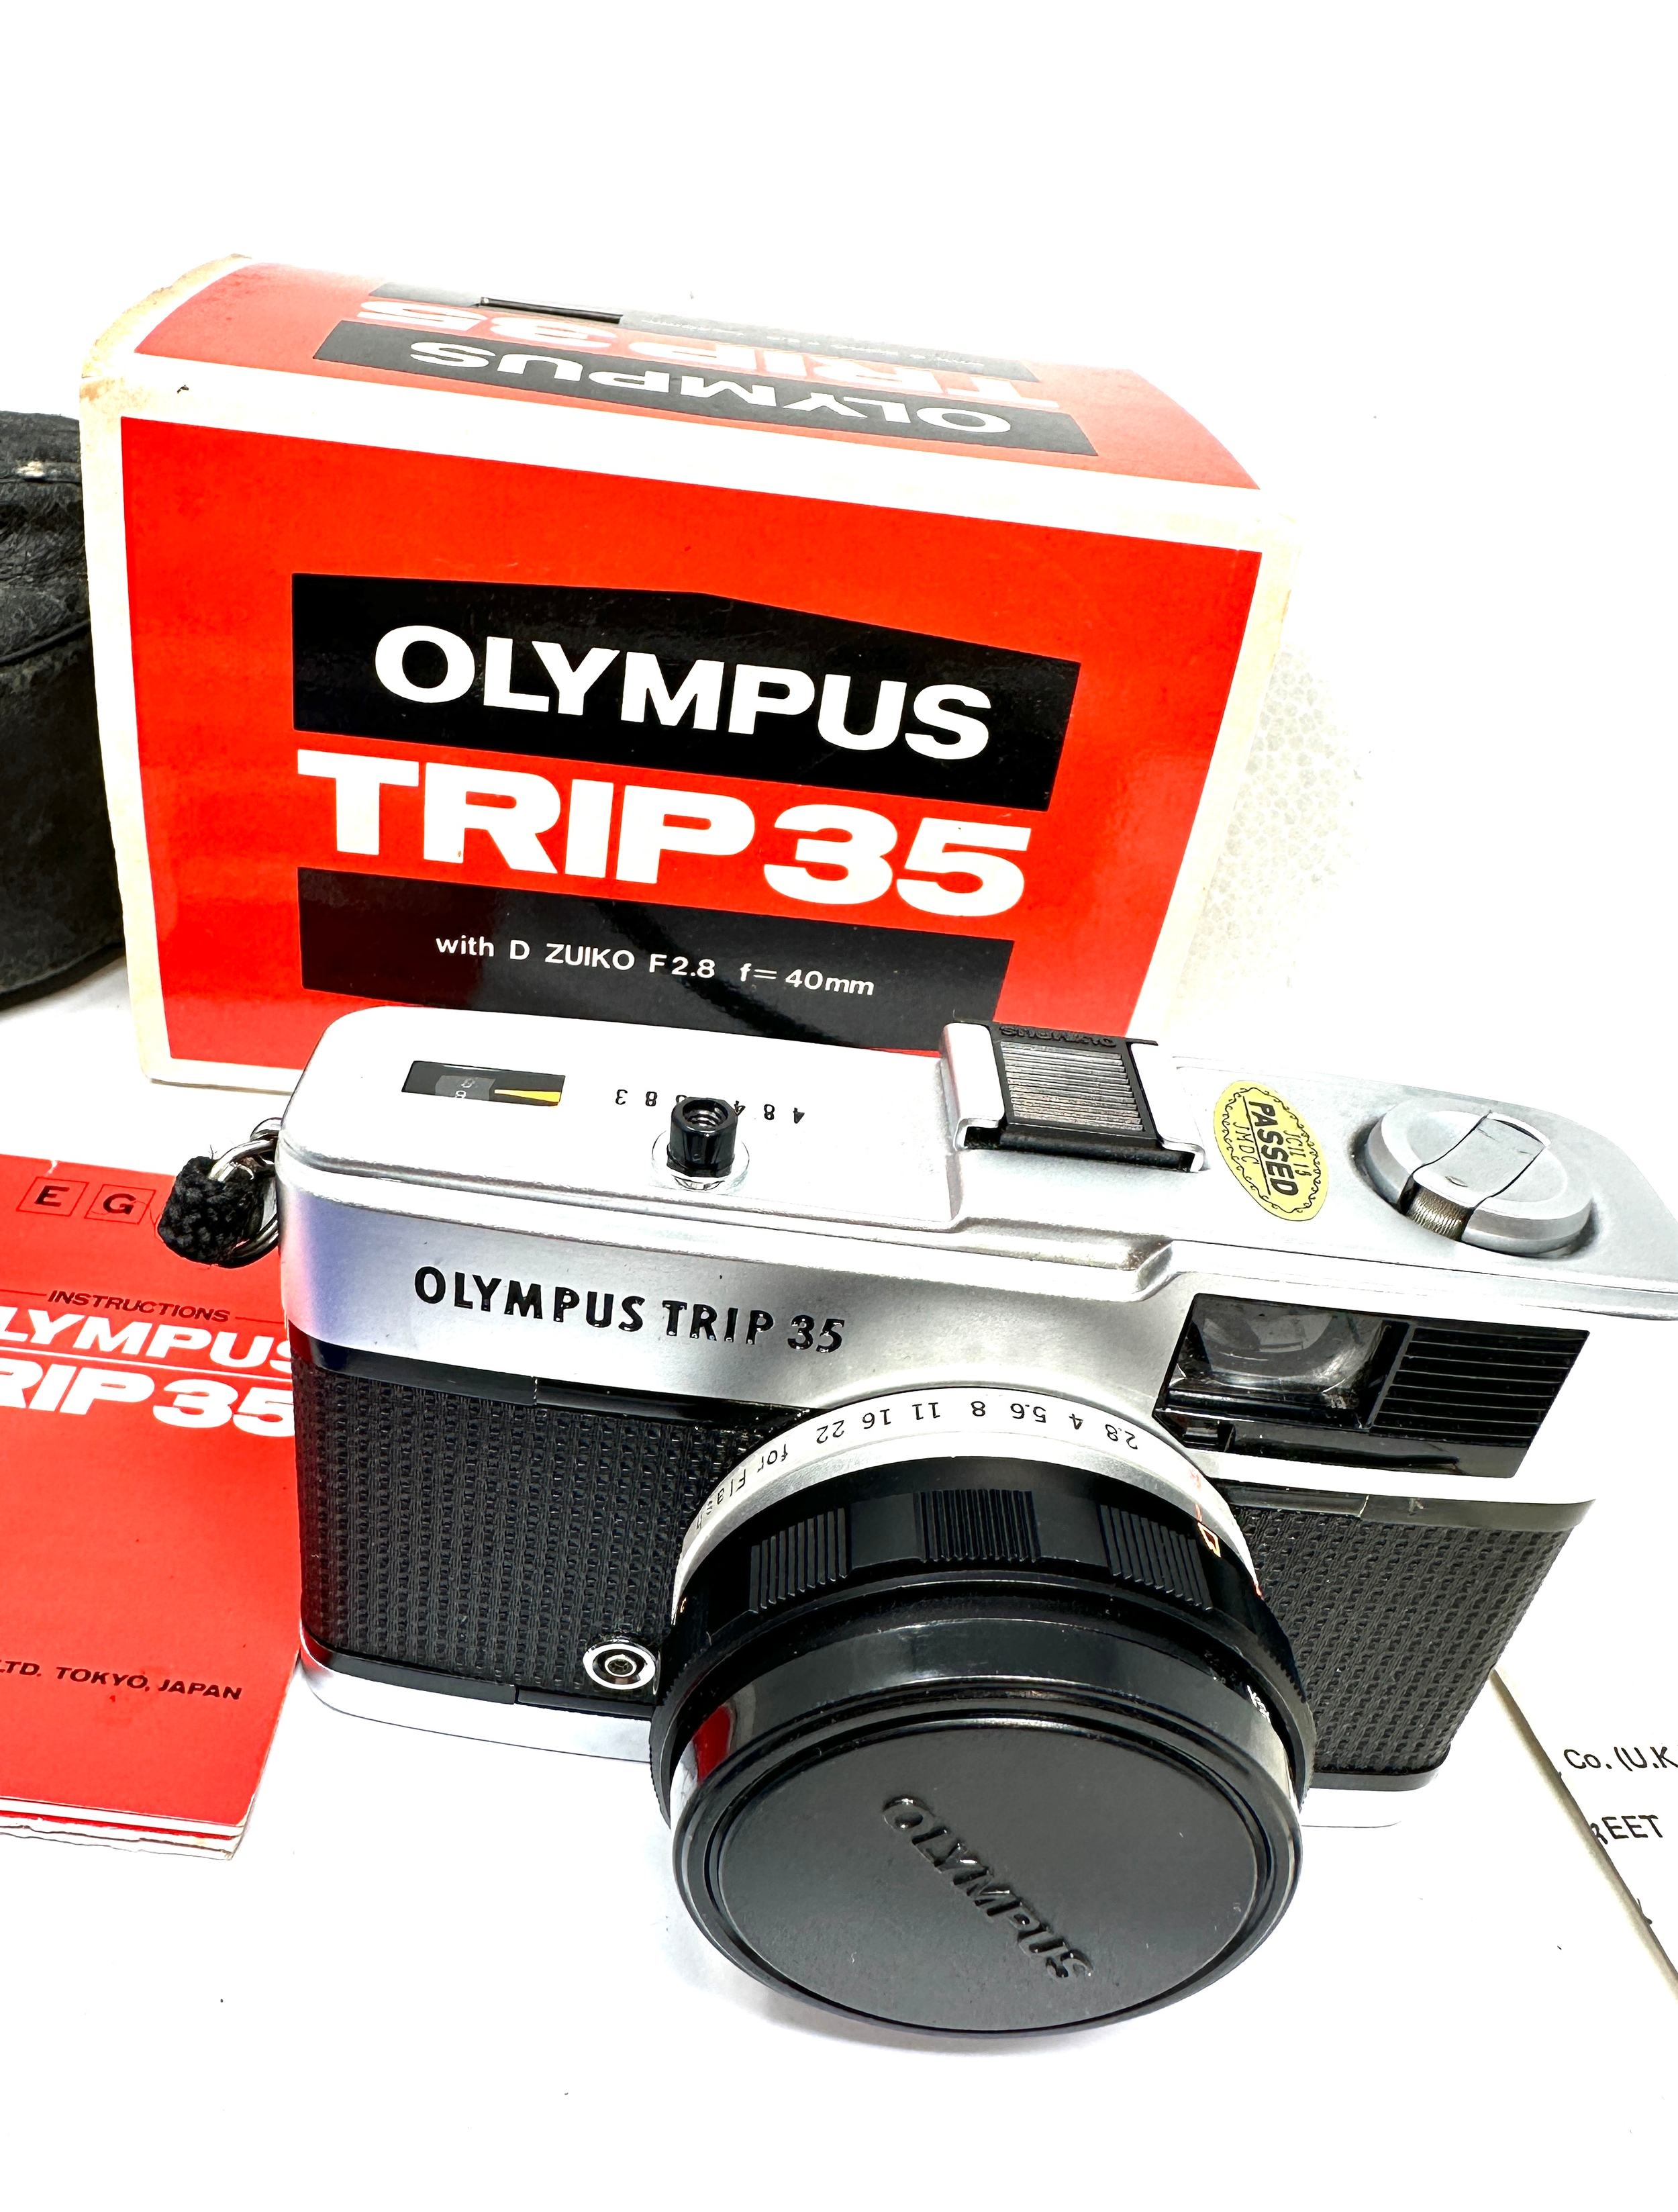 olympus trip 35 camera complete in box with booklets in good condition - Image 2 of 6